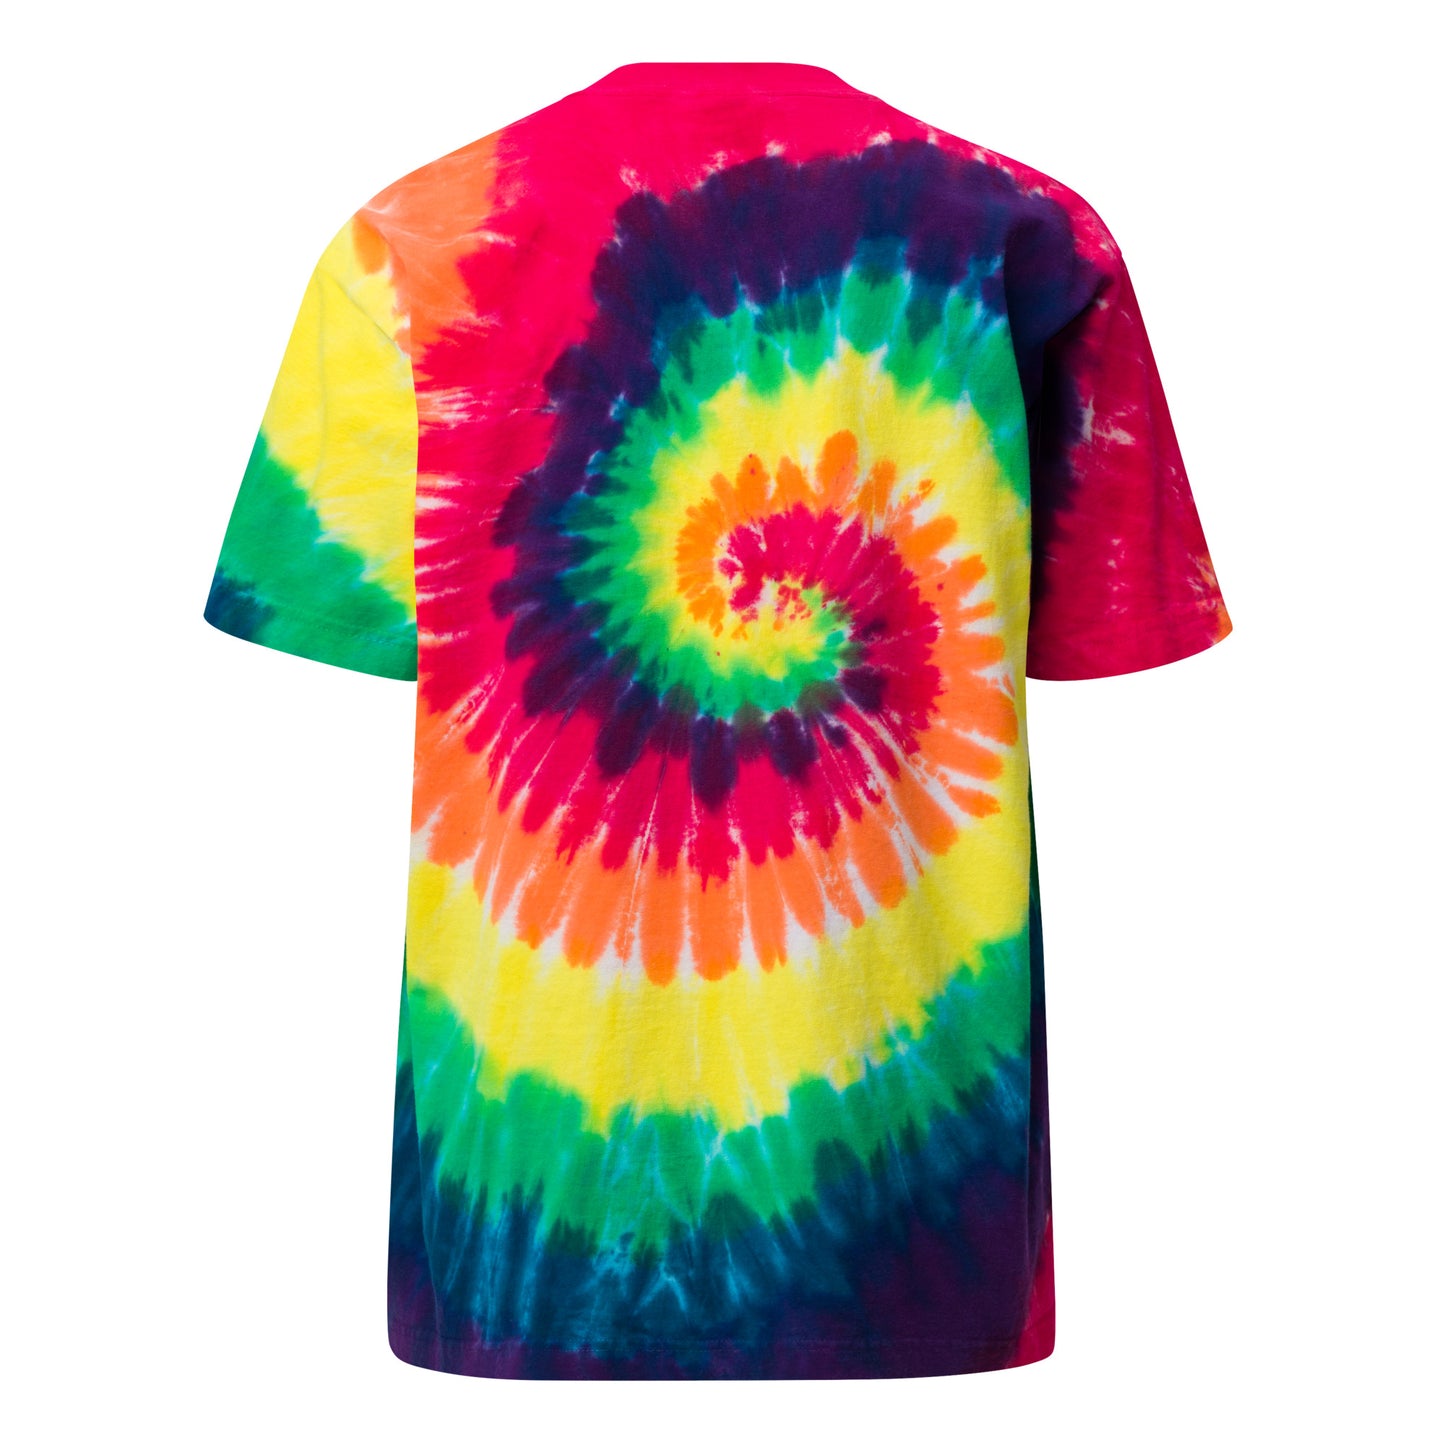 Now That I Have Your Attention - Oversized tie-dye t-shirt